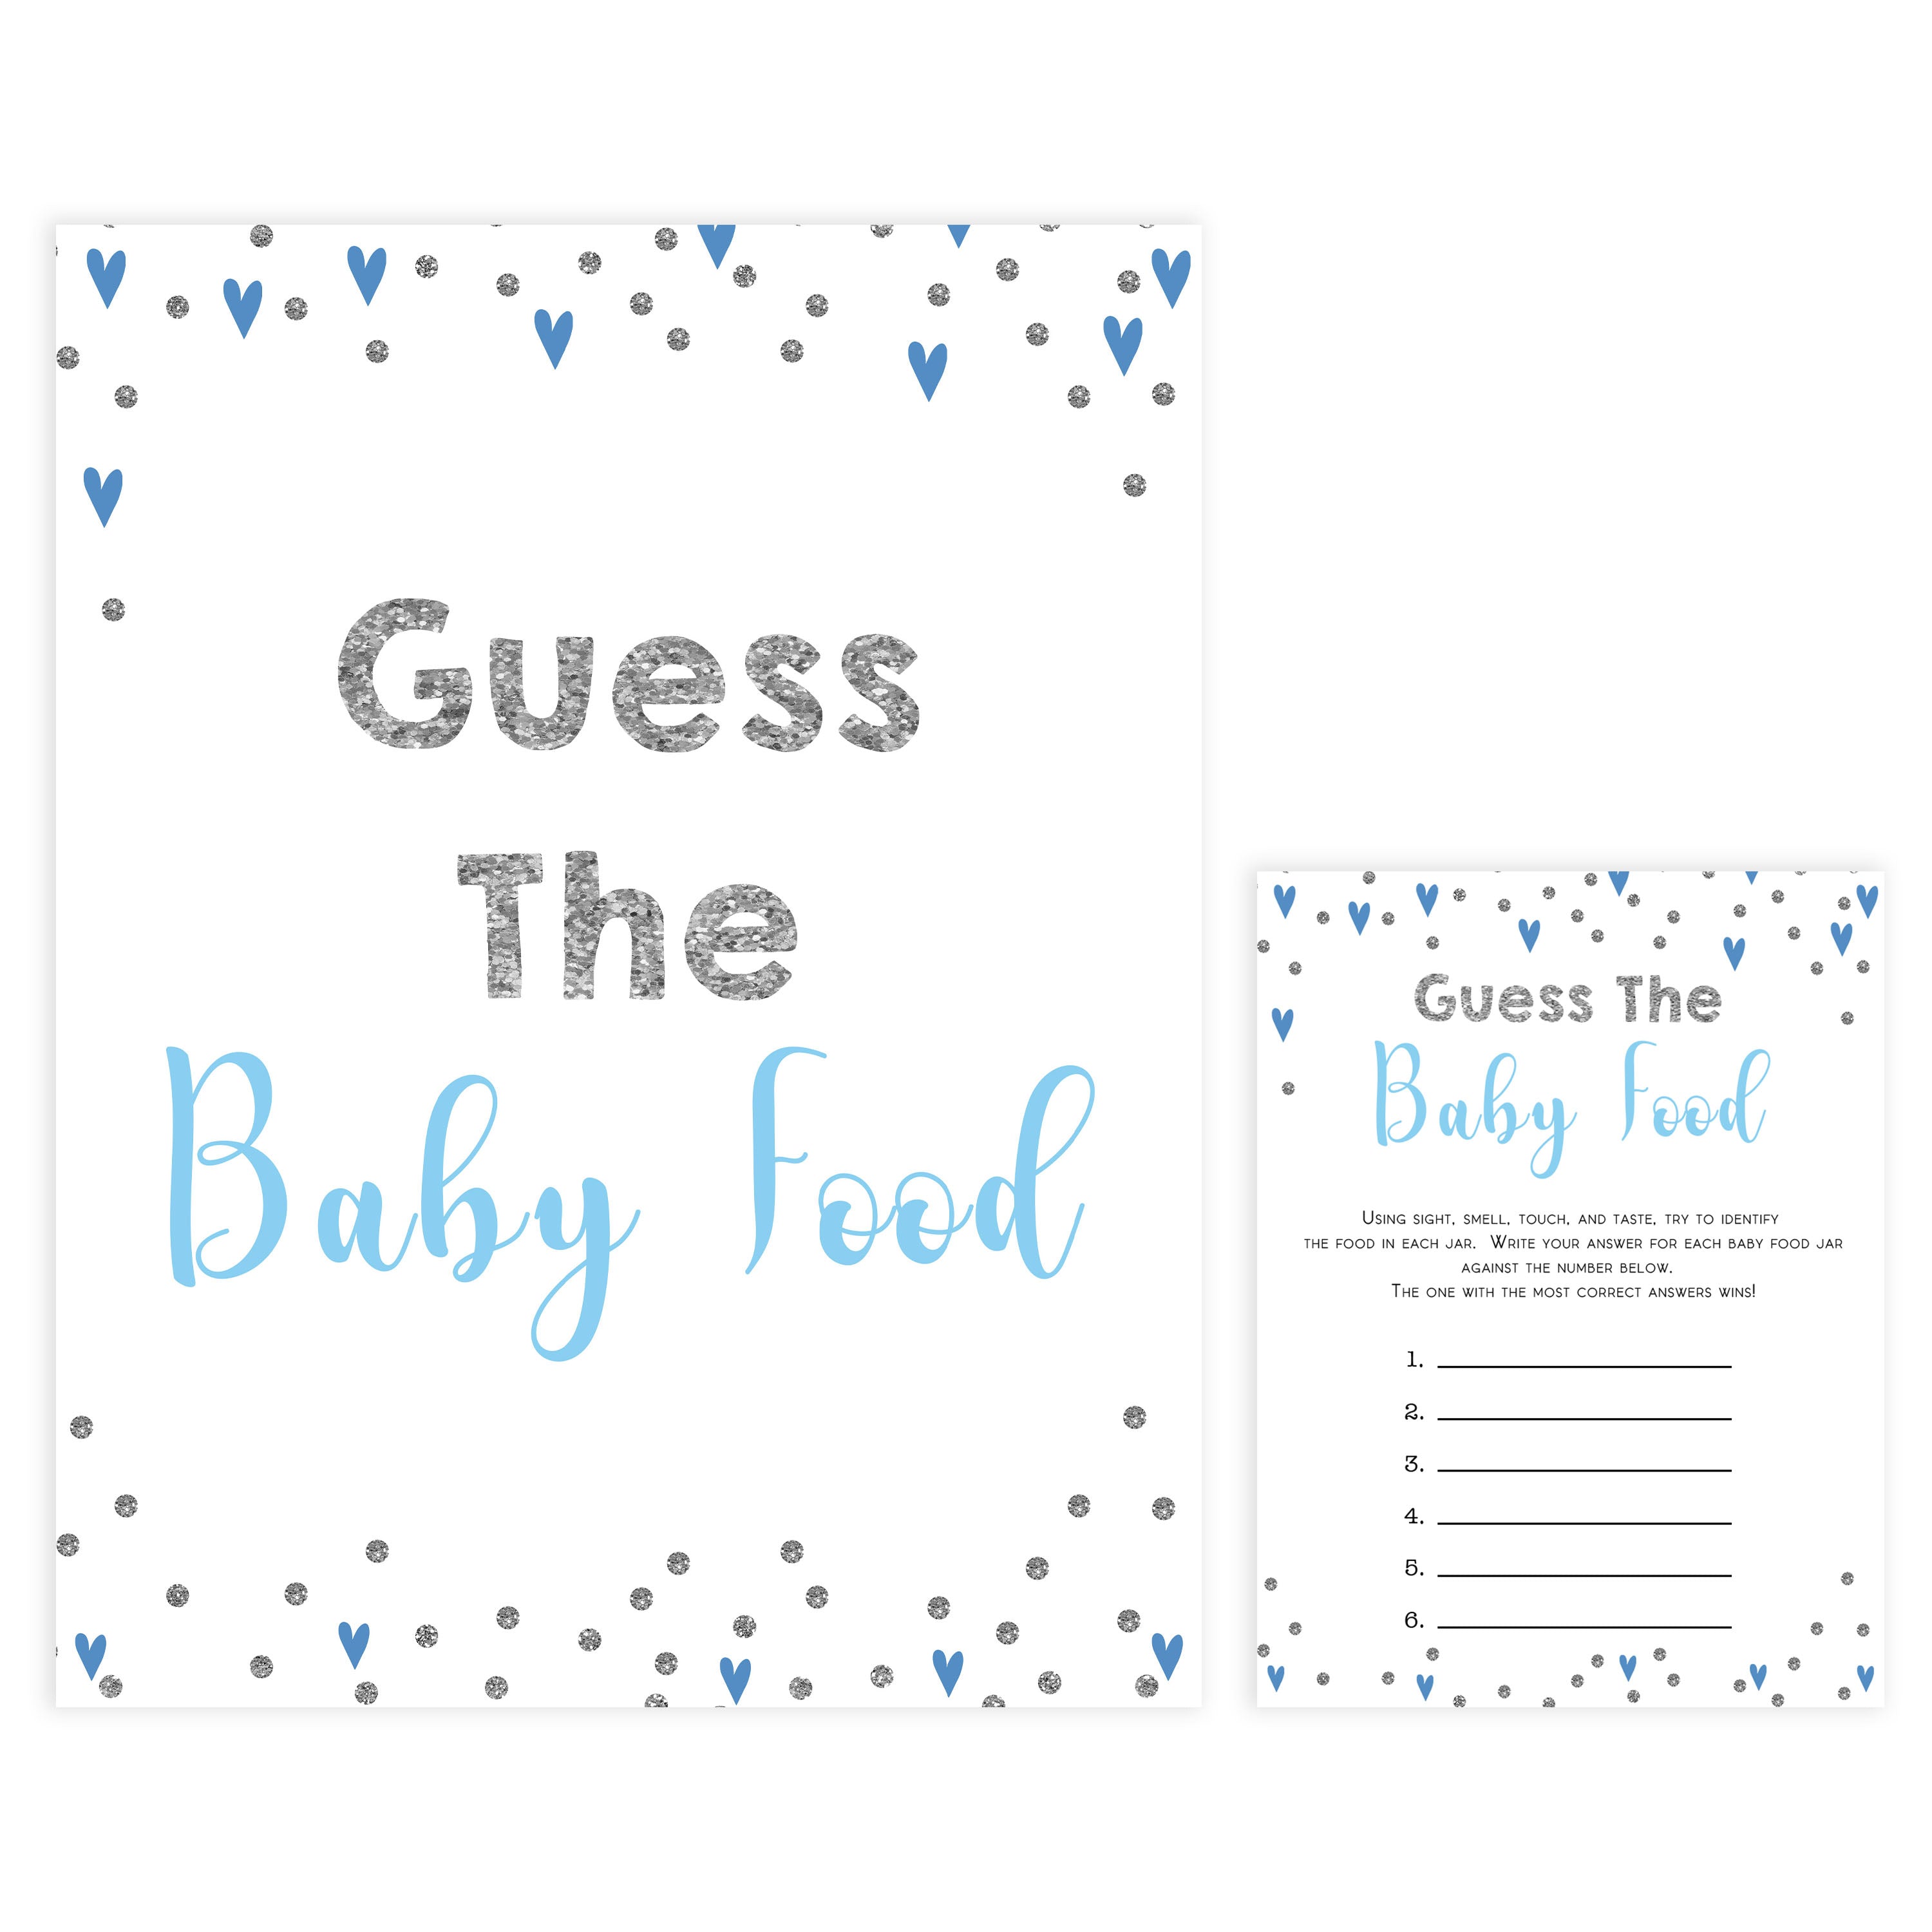 guess the baby food game, Printable baby shower games, small blue hearts fun baby games, baby shower games, fun baby shower ideas, top baby shower ideas, silver baby shower, blue hearts baby shower ideas